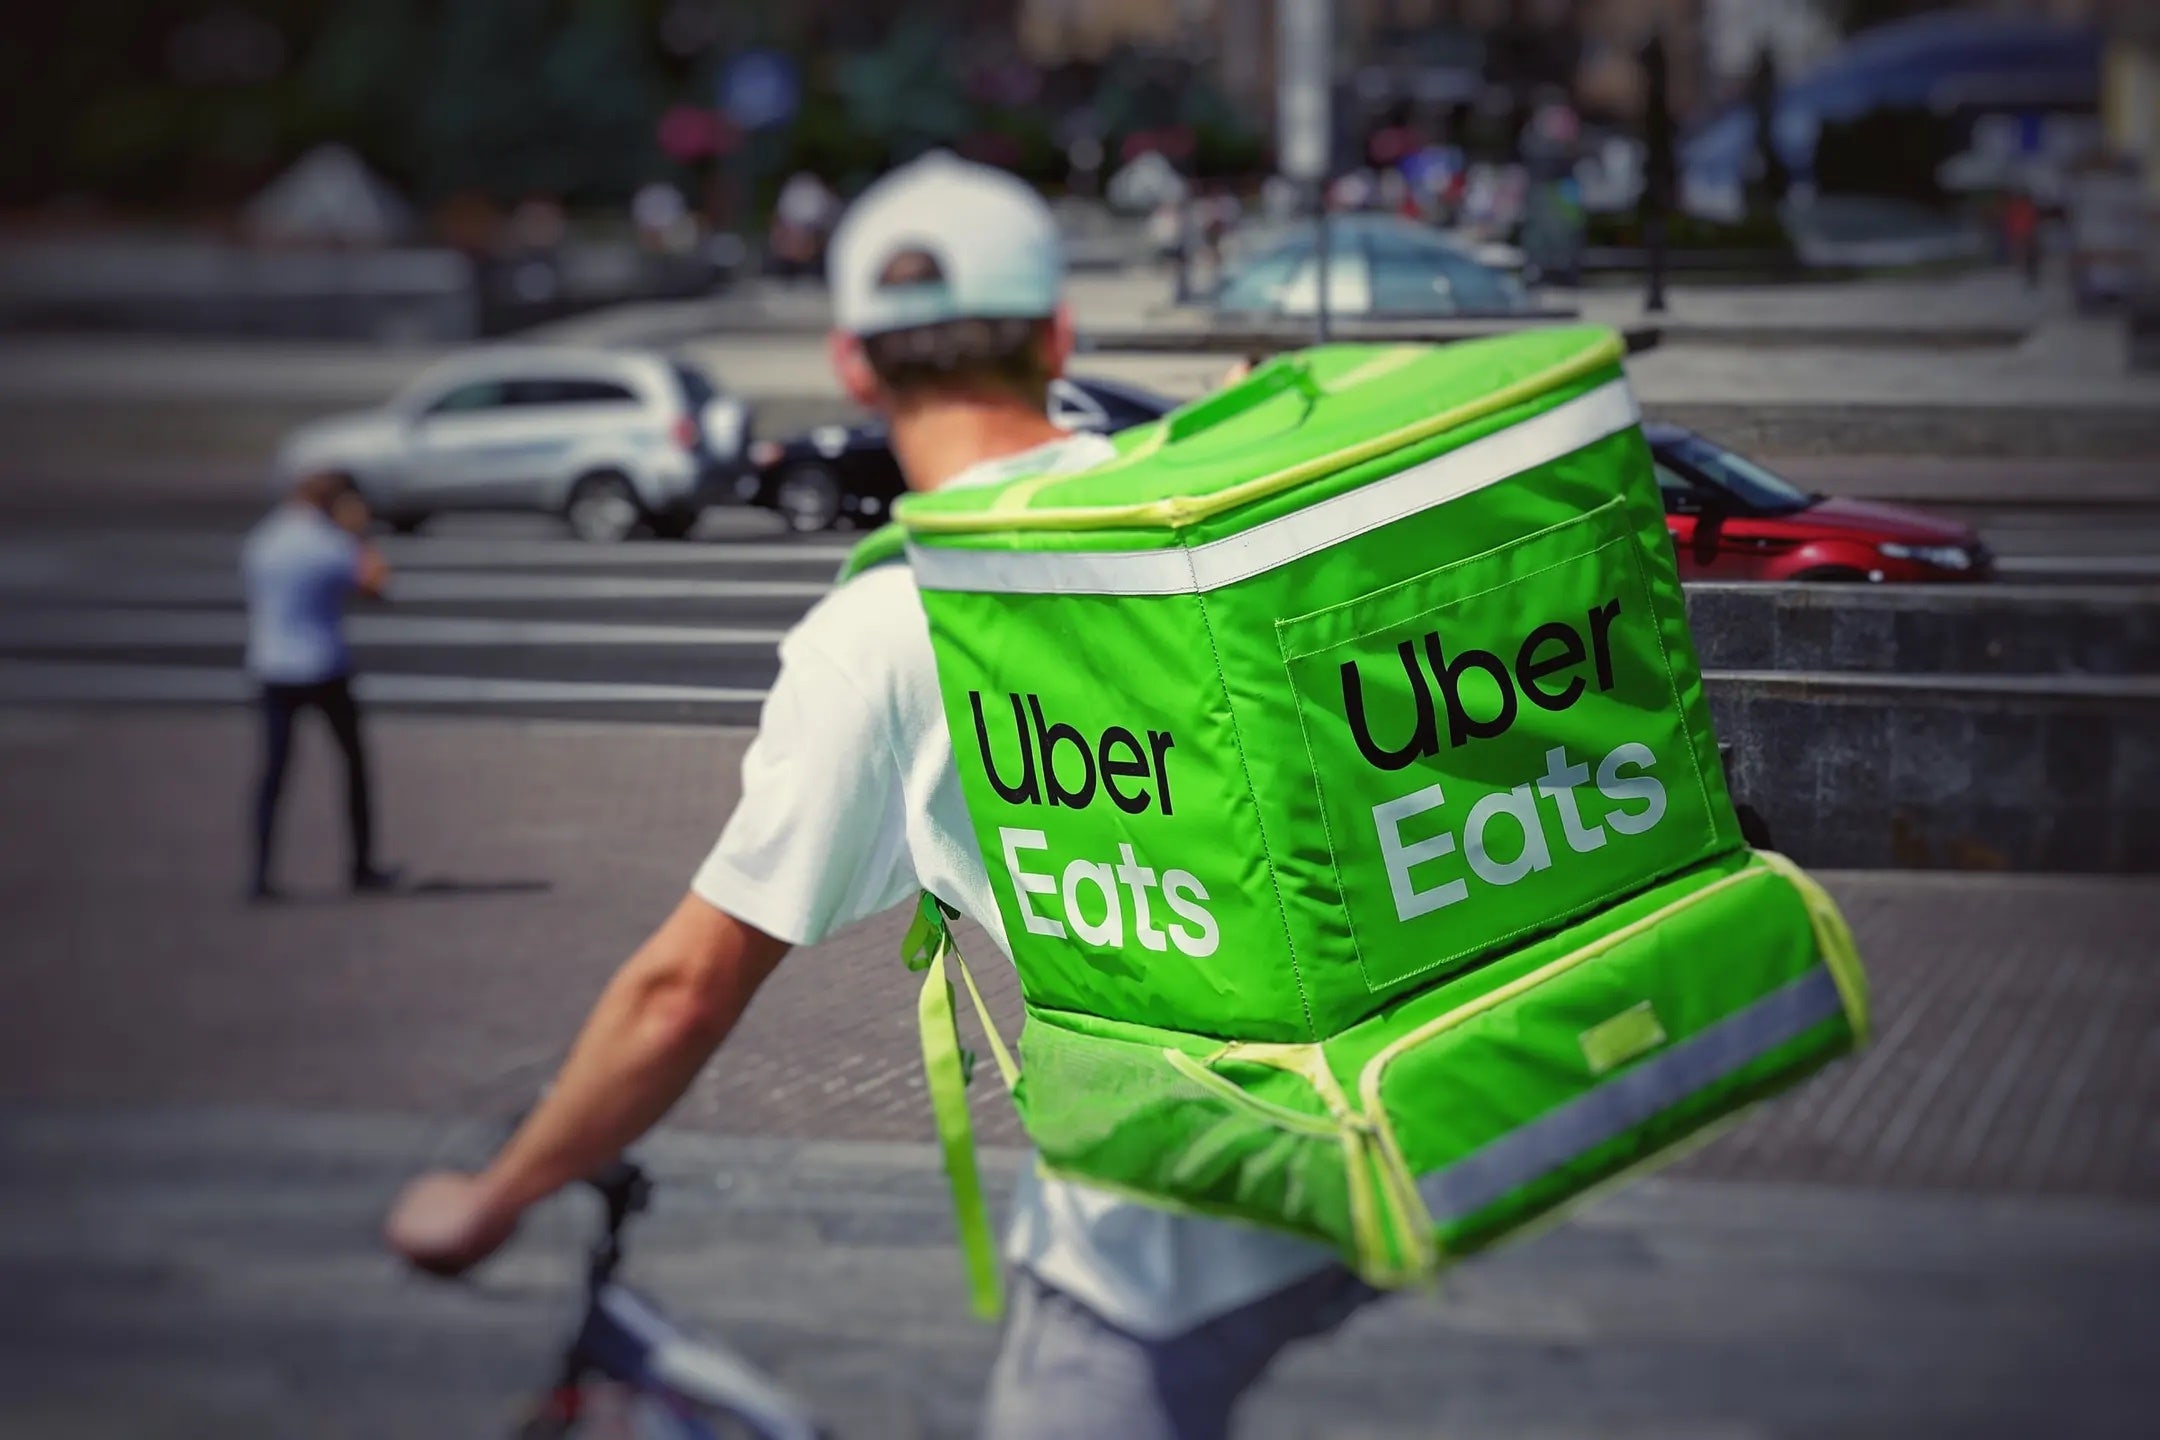 Uber Eats Begins Cannabis Deliveries In Toronto Via Leafly Partnership